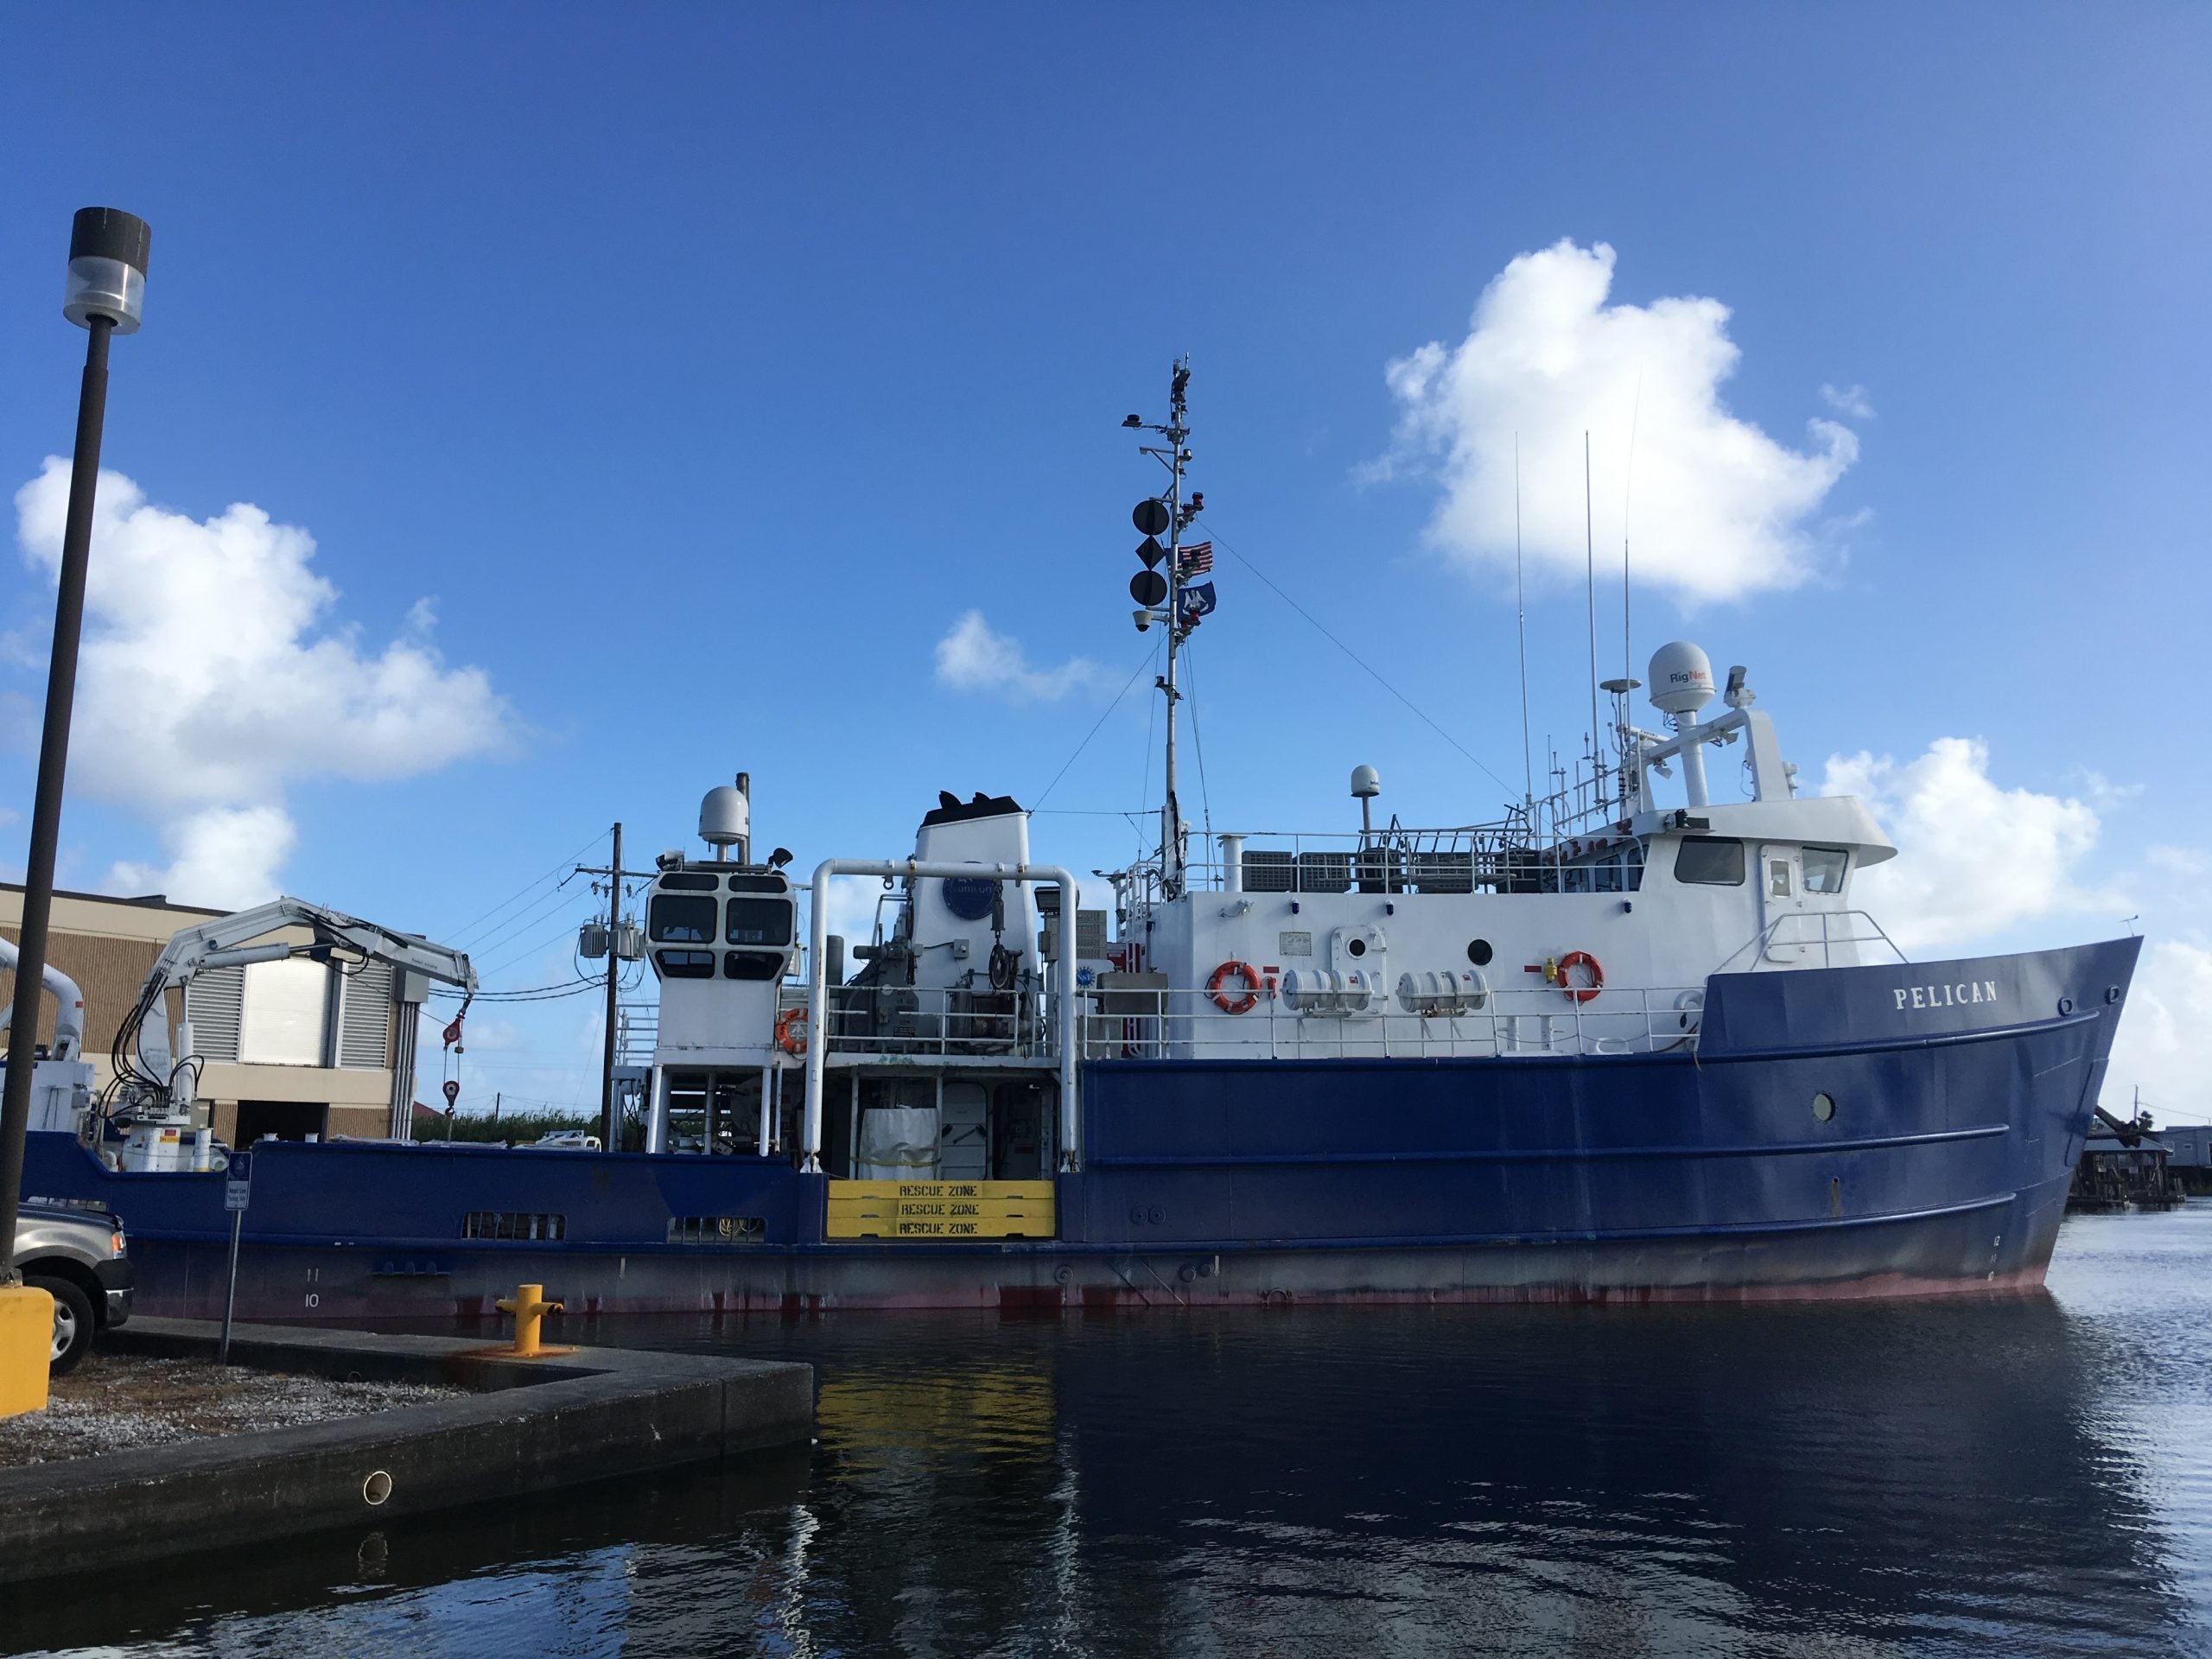 A photo of the Research Vessel Pelican.